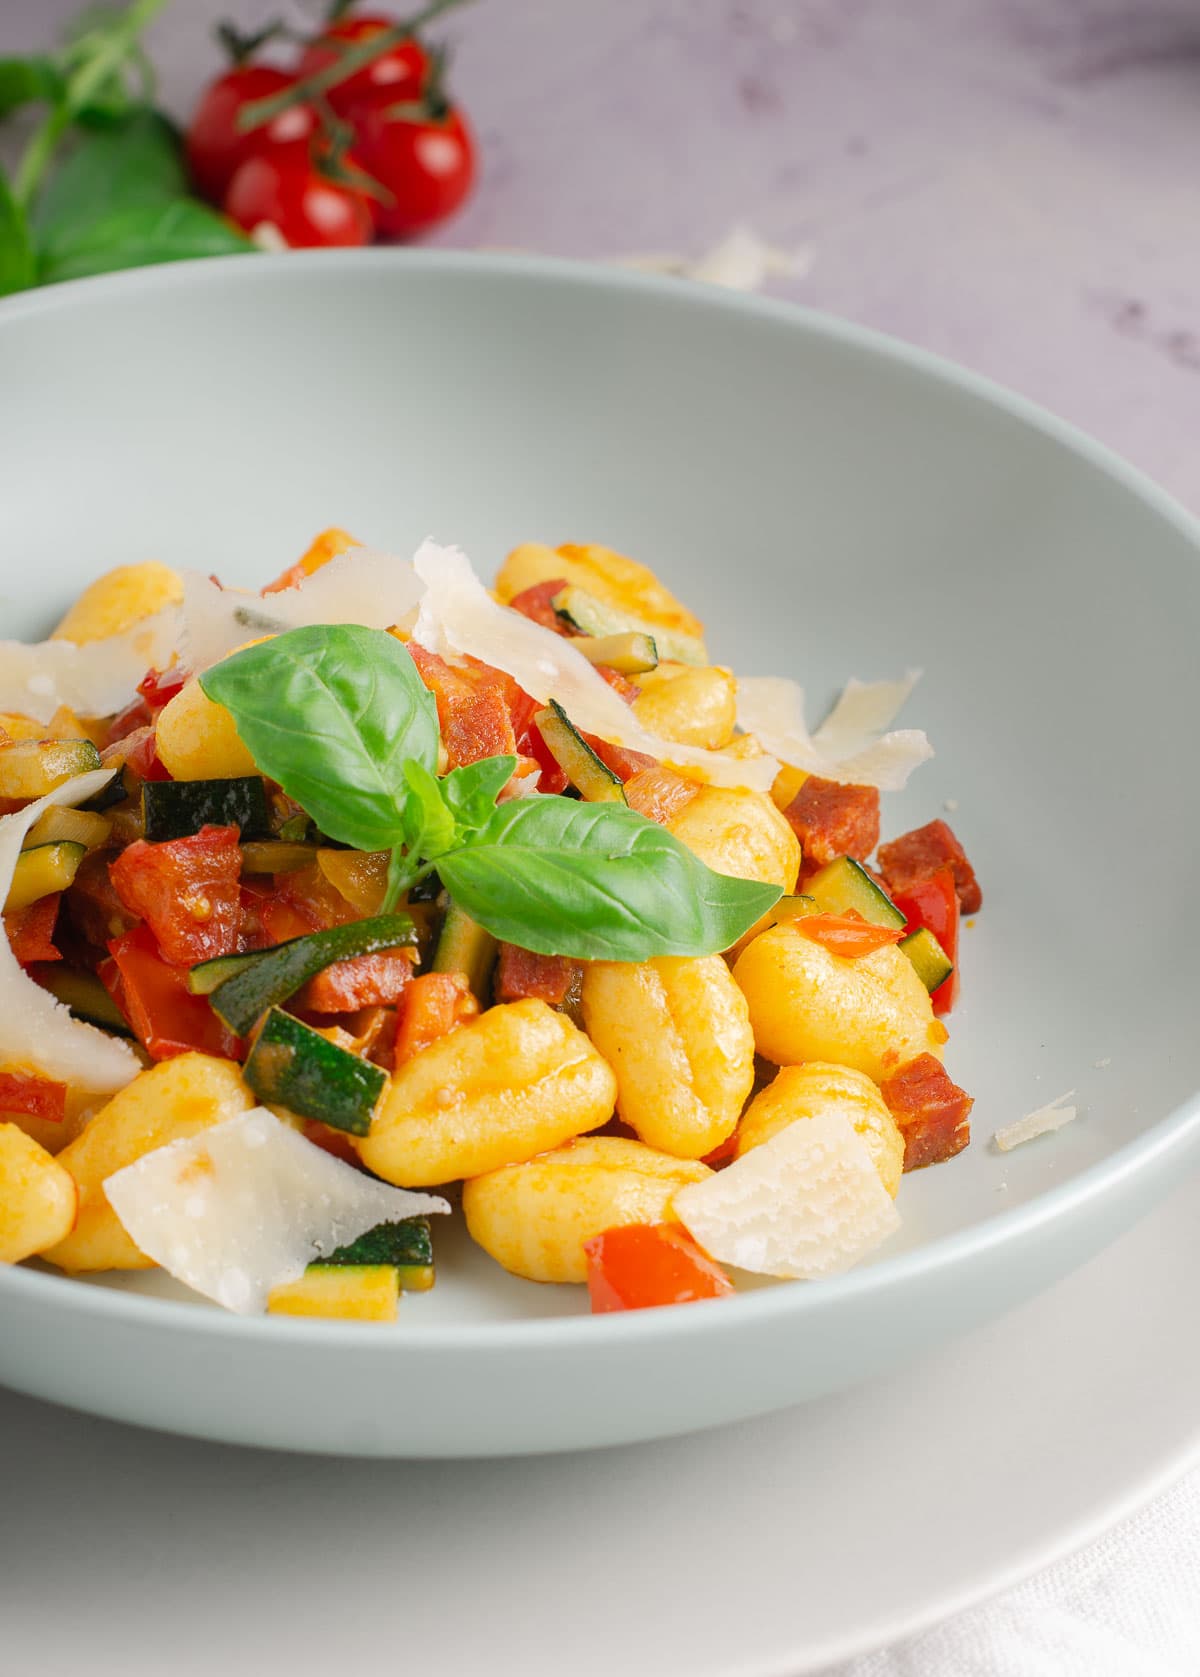 A fresh plate of gnocchi tossed with tomatoes, courgettes and chorizo.